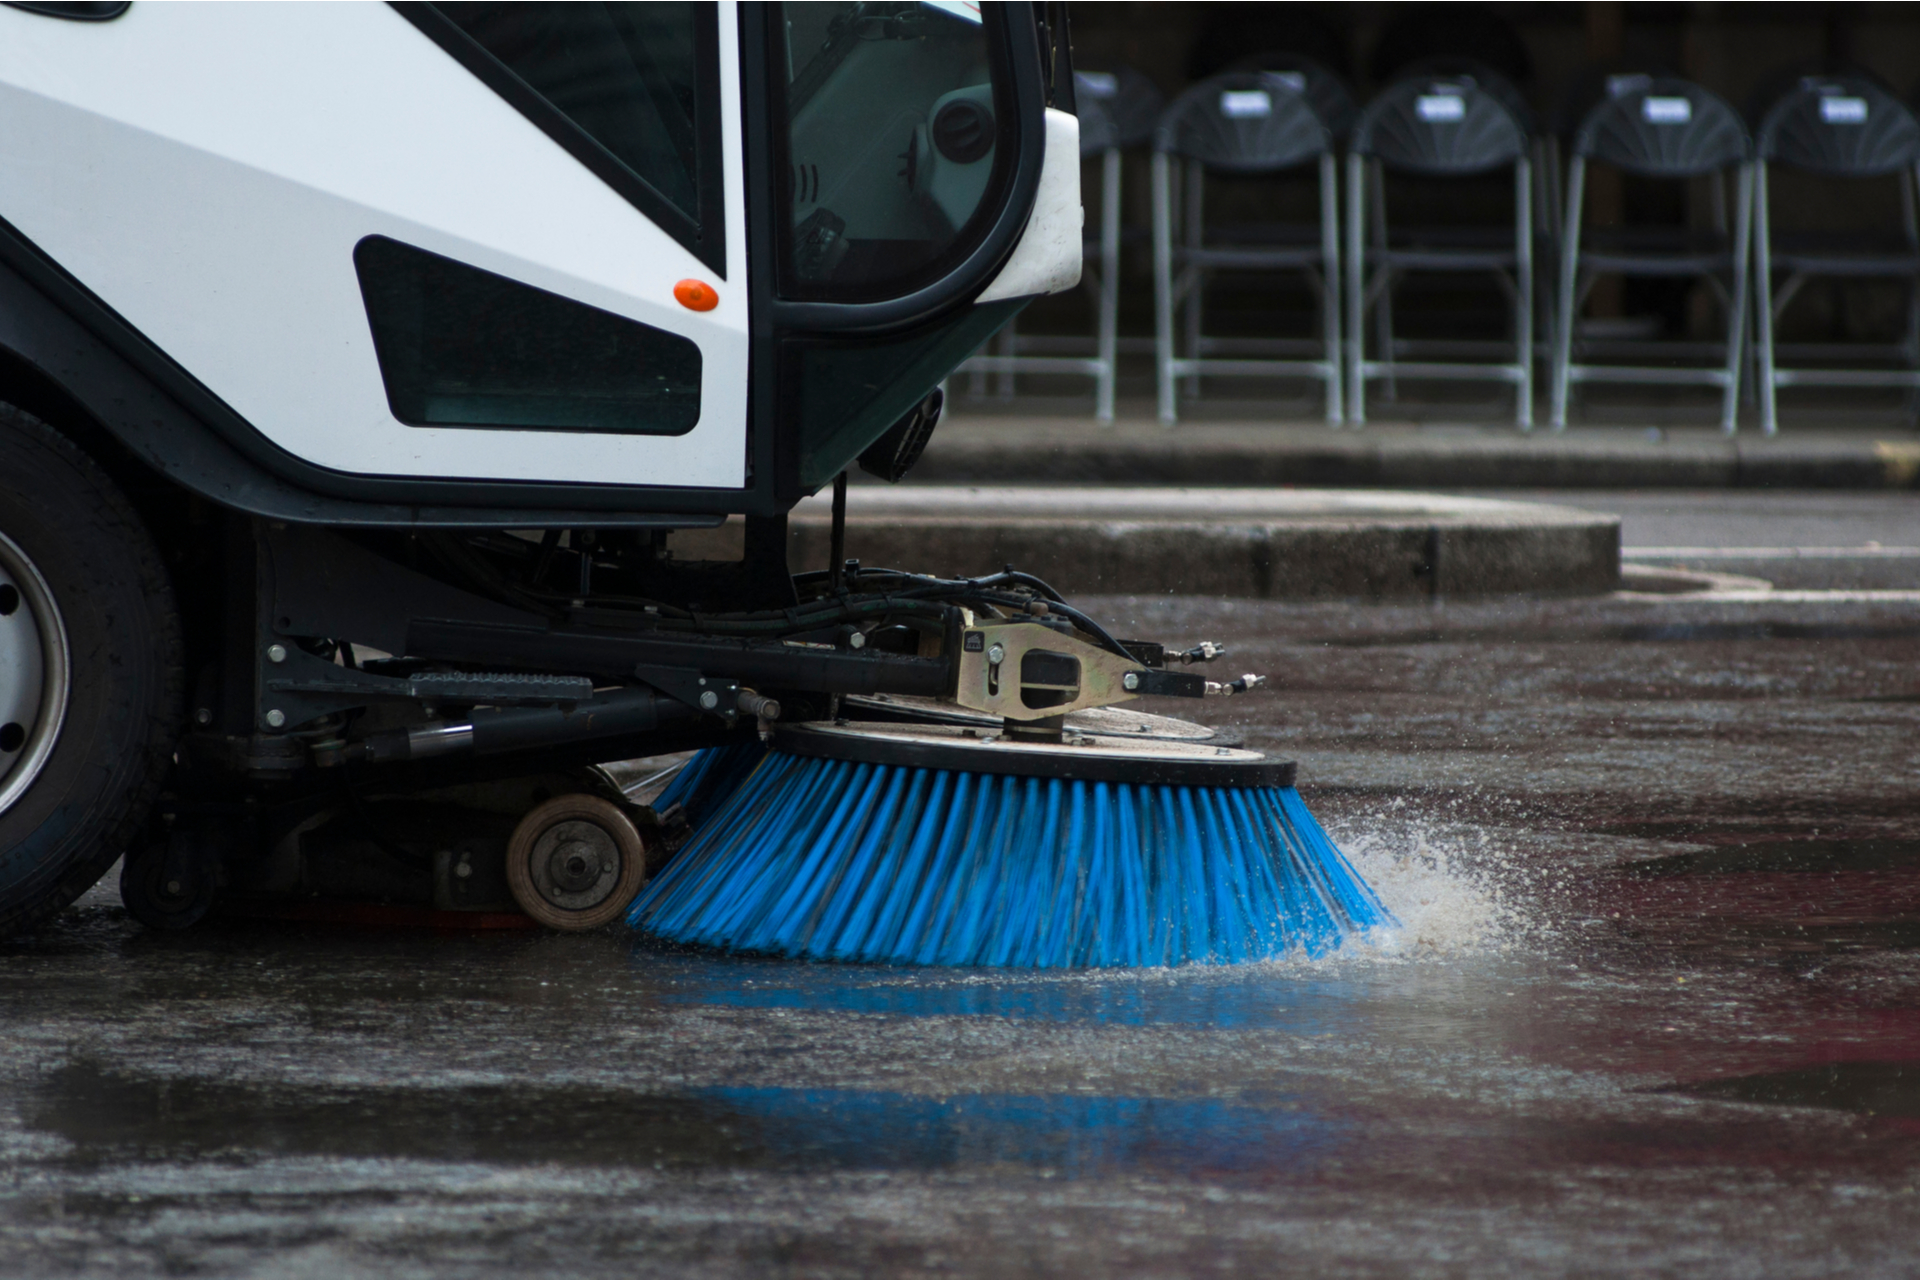 Road sweeper vehicle Dallas